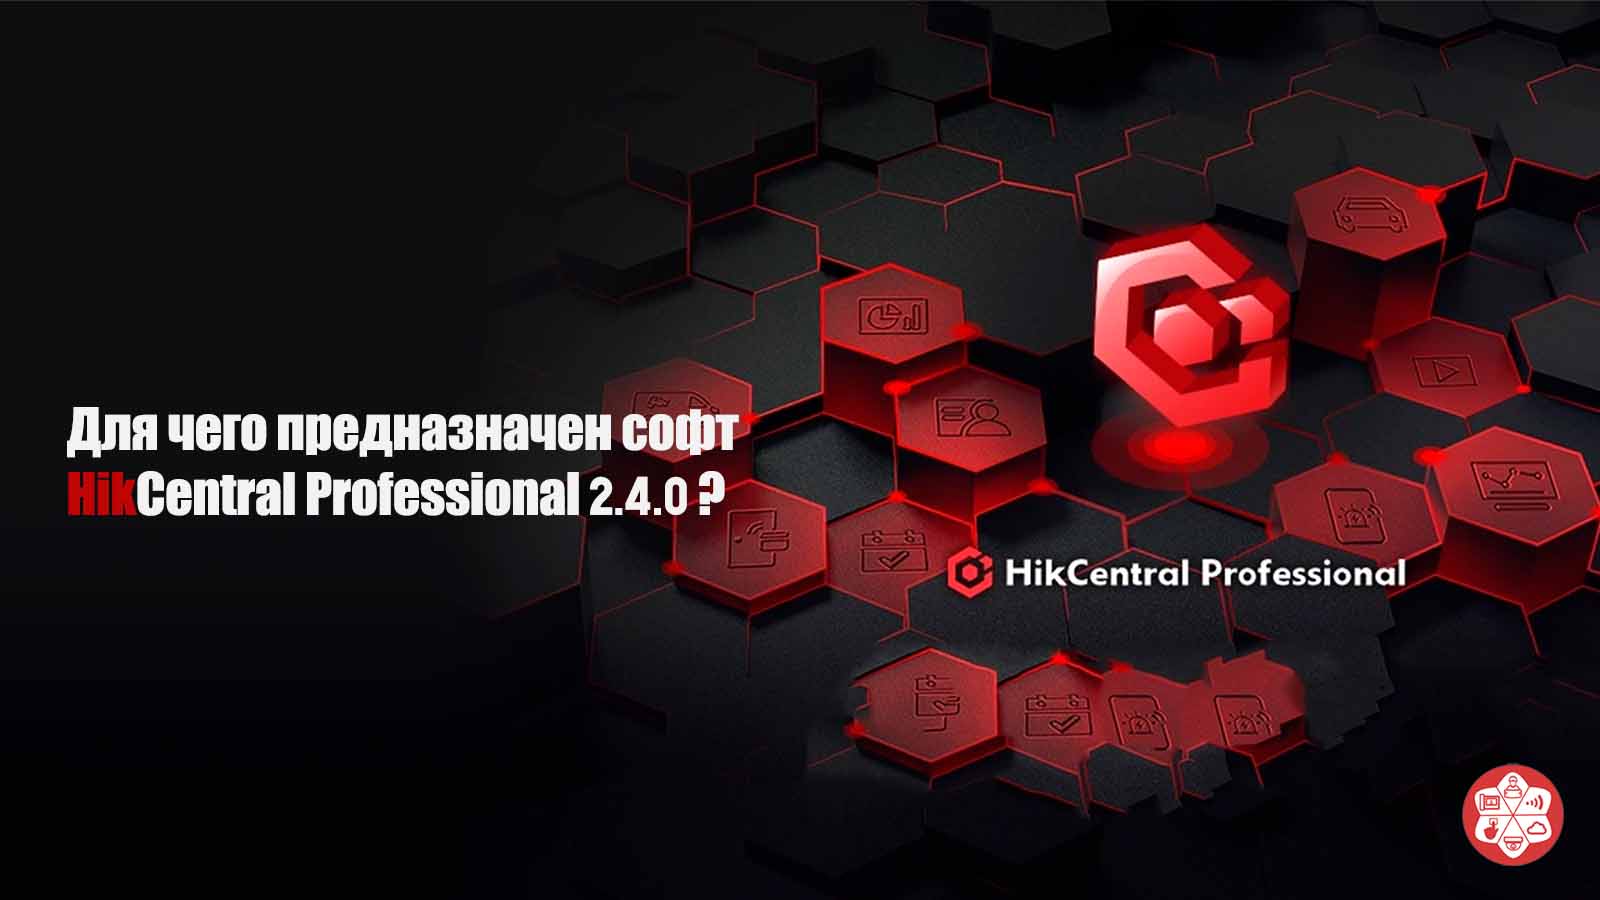 Софт HikCentral Professional 2.4.0